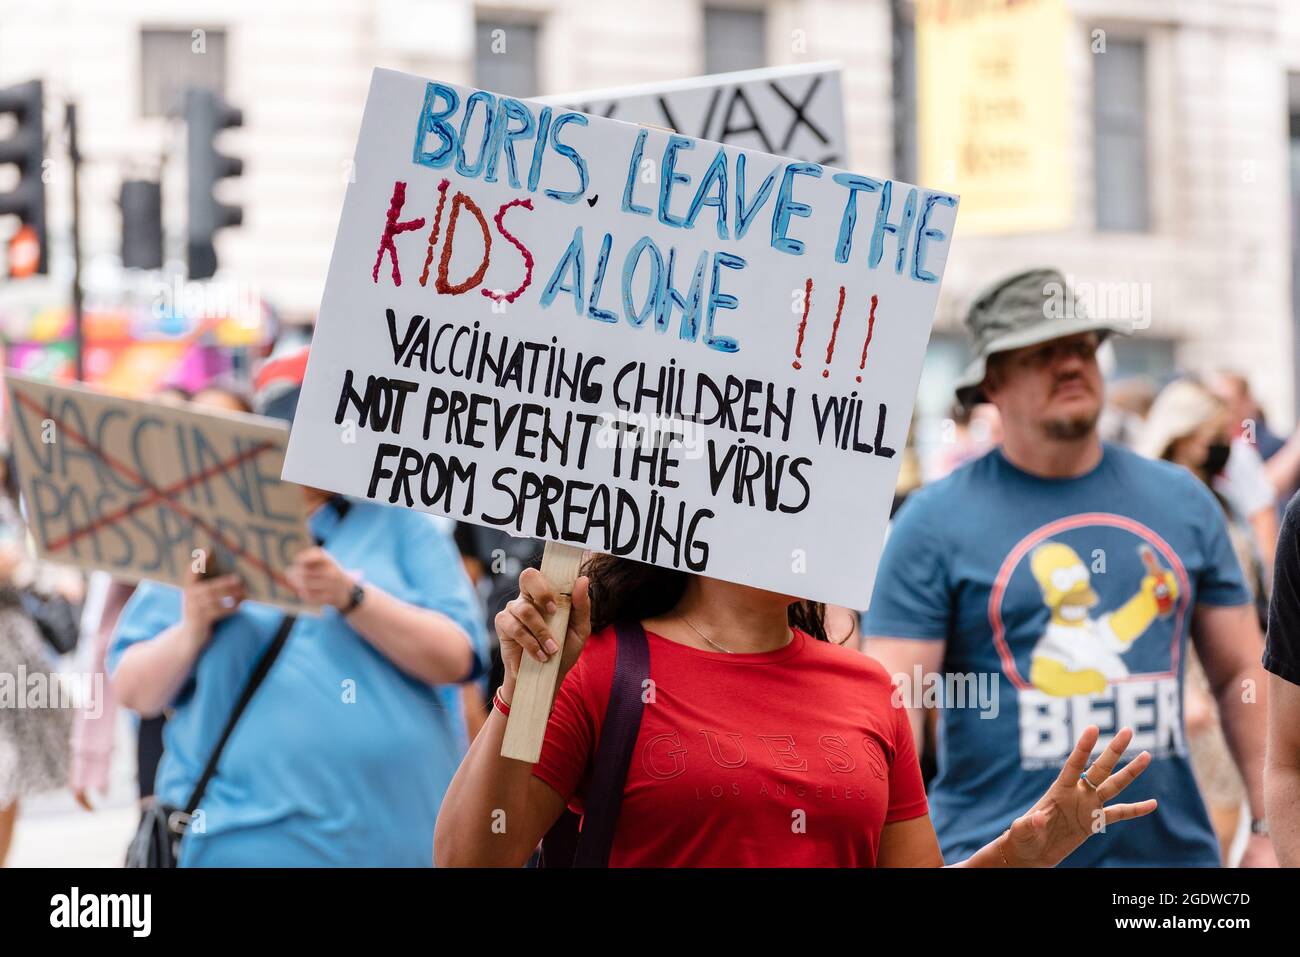 London, UK. 14 August 2021. Protesters march to BBC headquarters against vaccinations, vaccine passports and COVID restrictions. Stock Photo